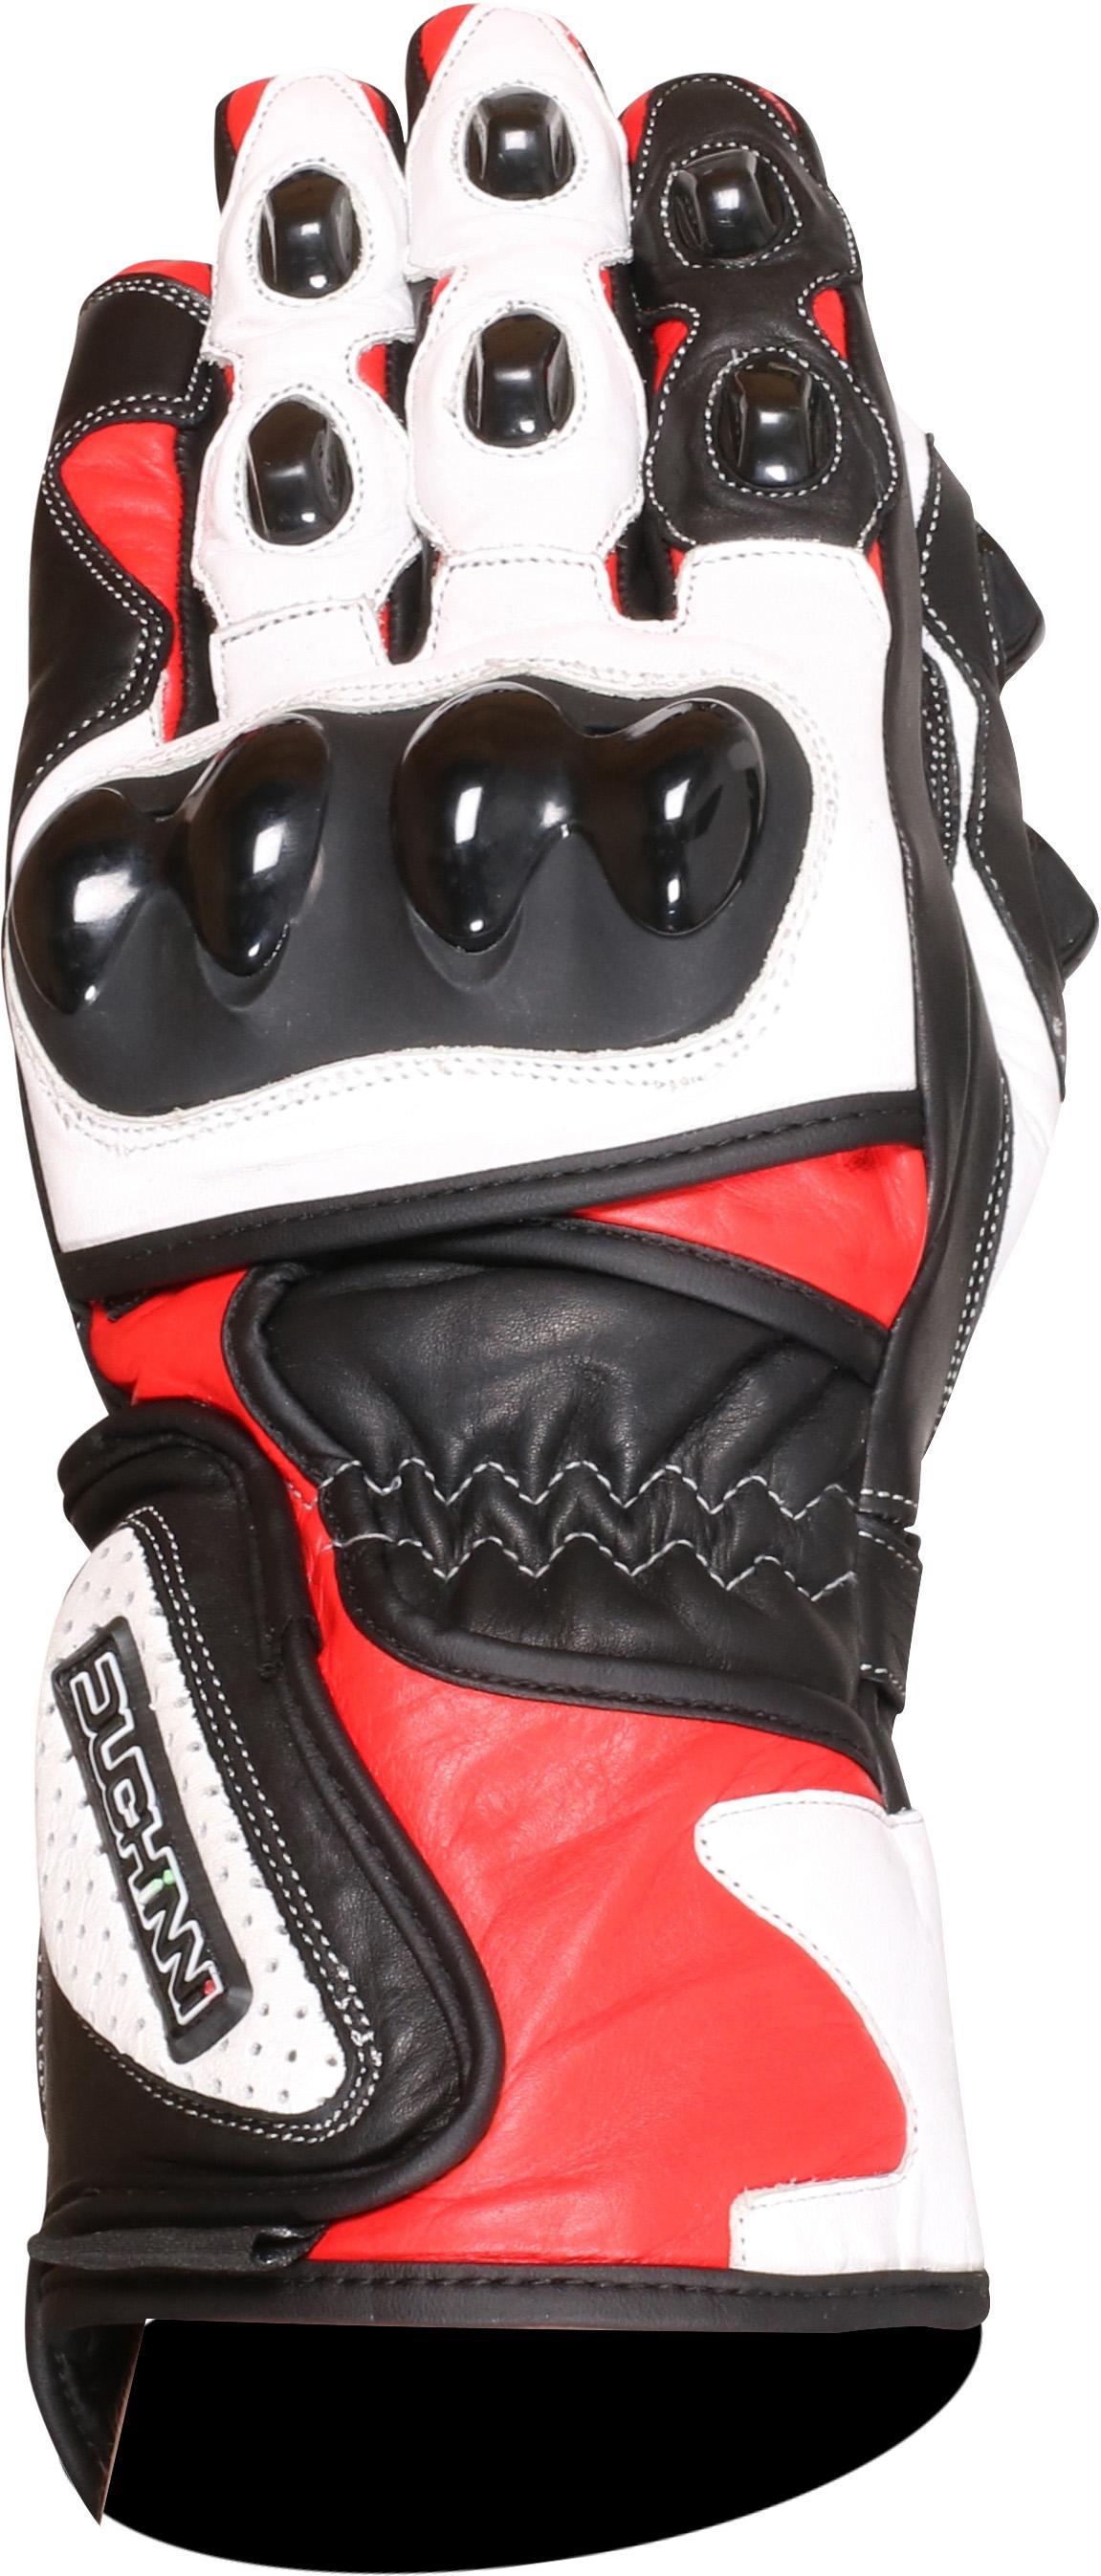 Duchinni Dr1 Motorcycle Gloves - Black And Red, 2Xl